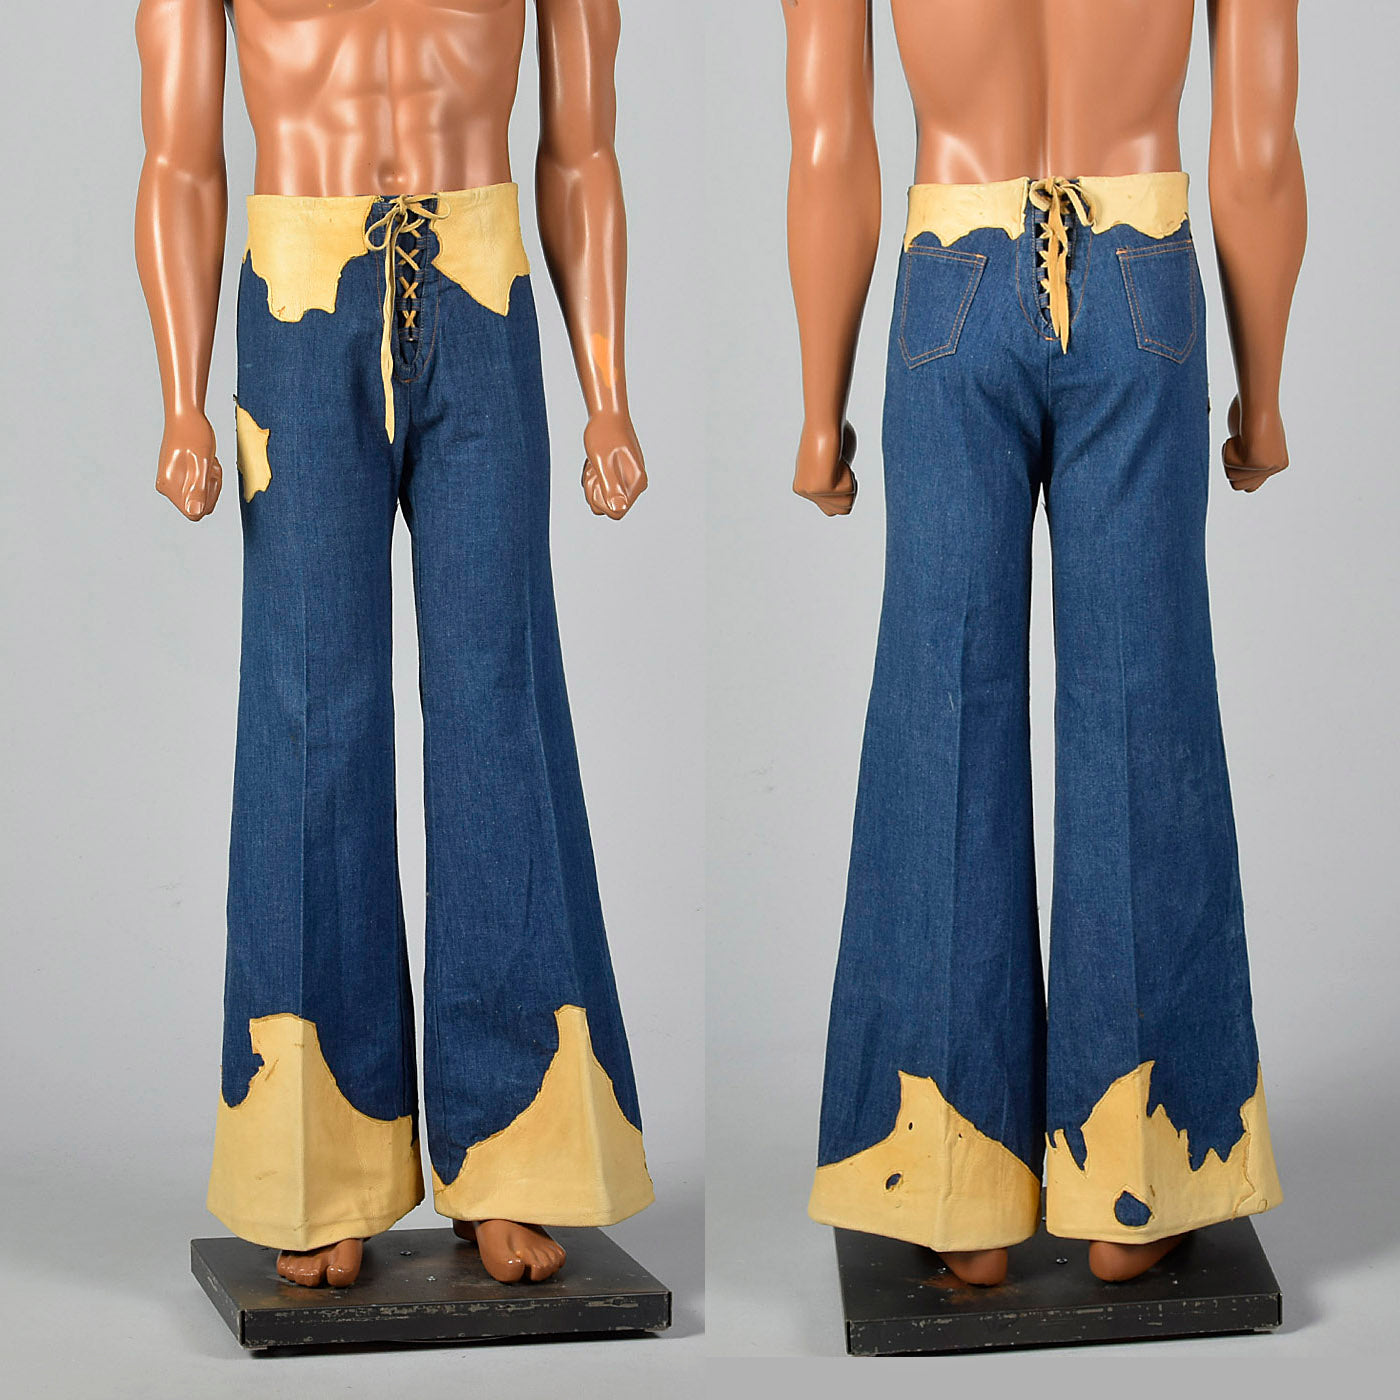 1970s Mens Bell Bottom Jeans with Lace Up Waist - Style ...